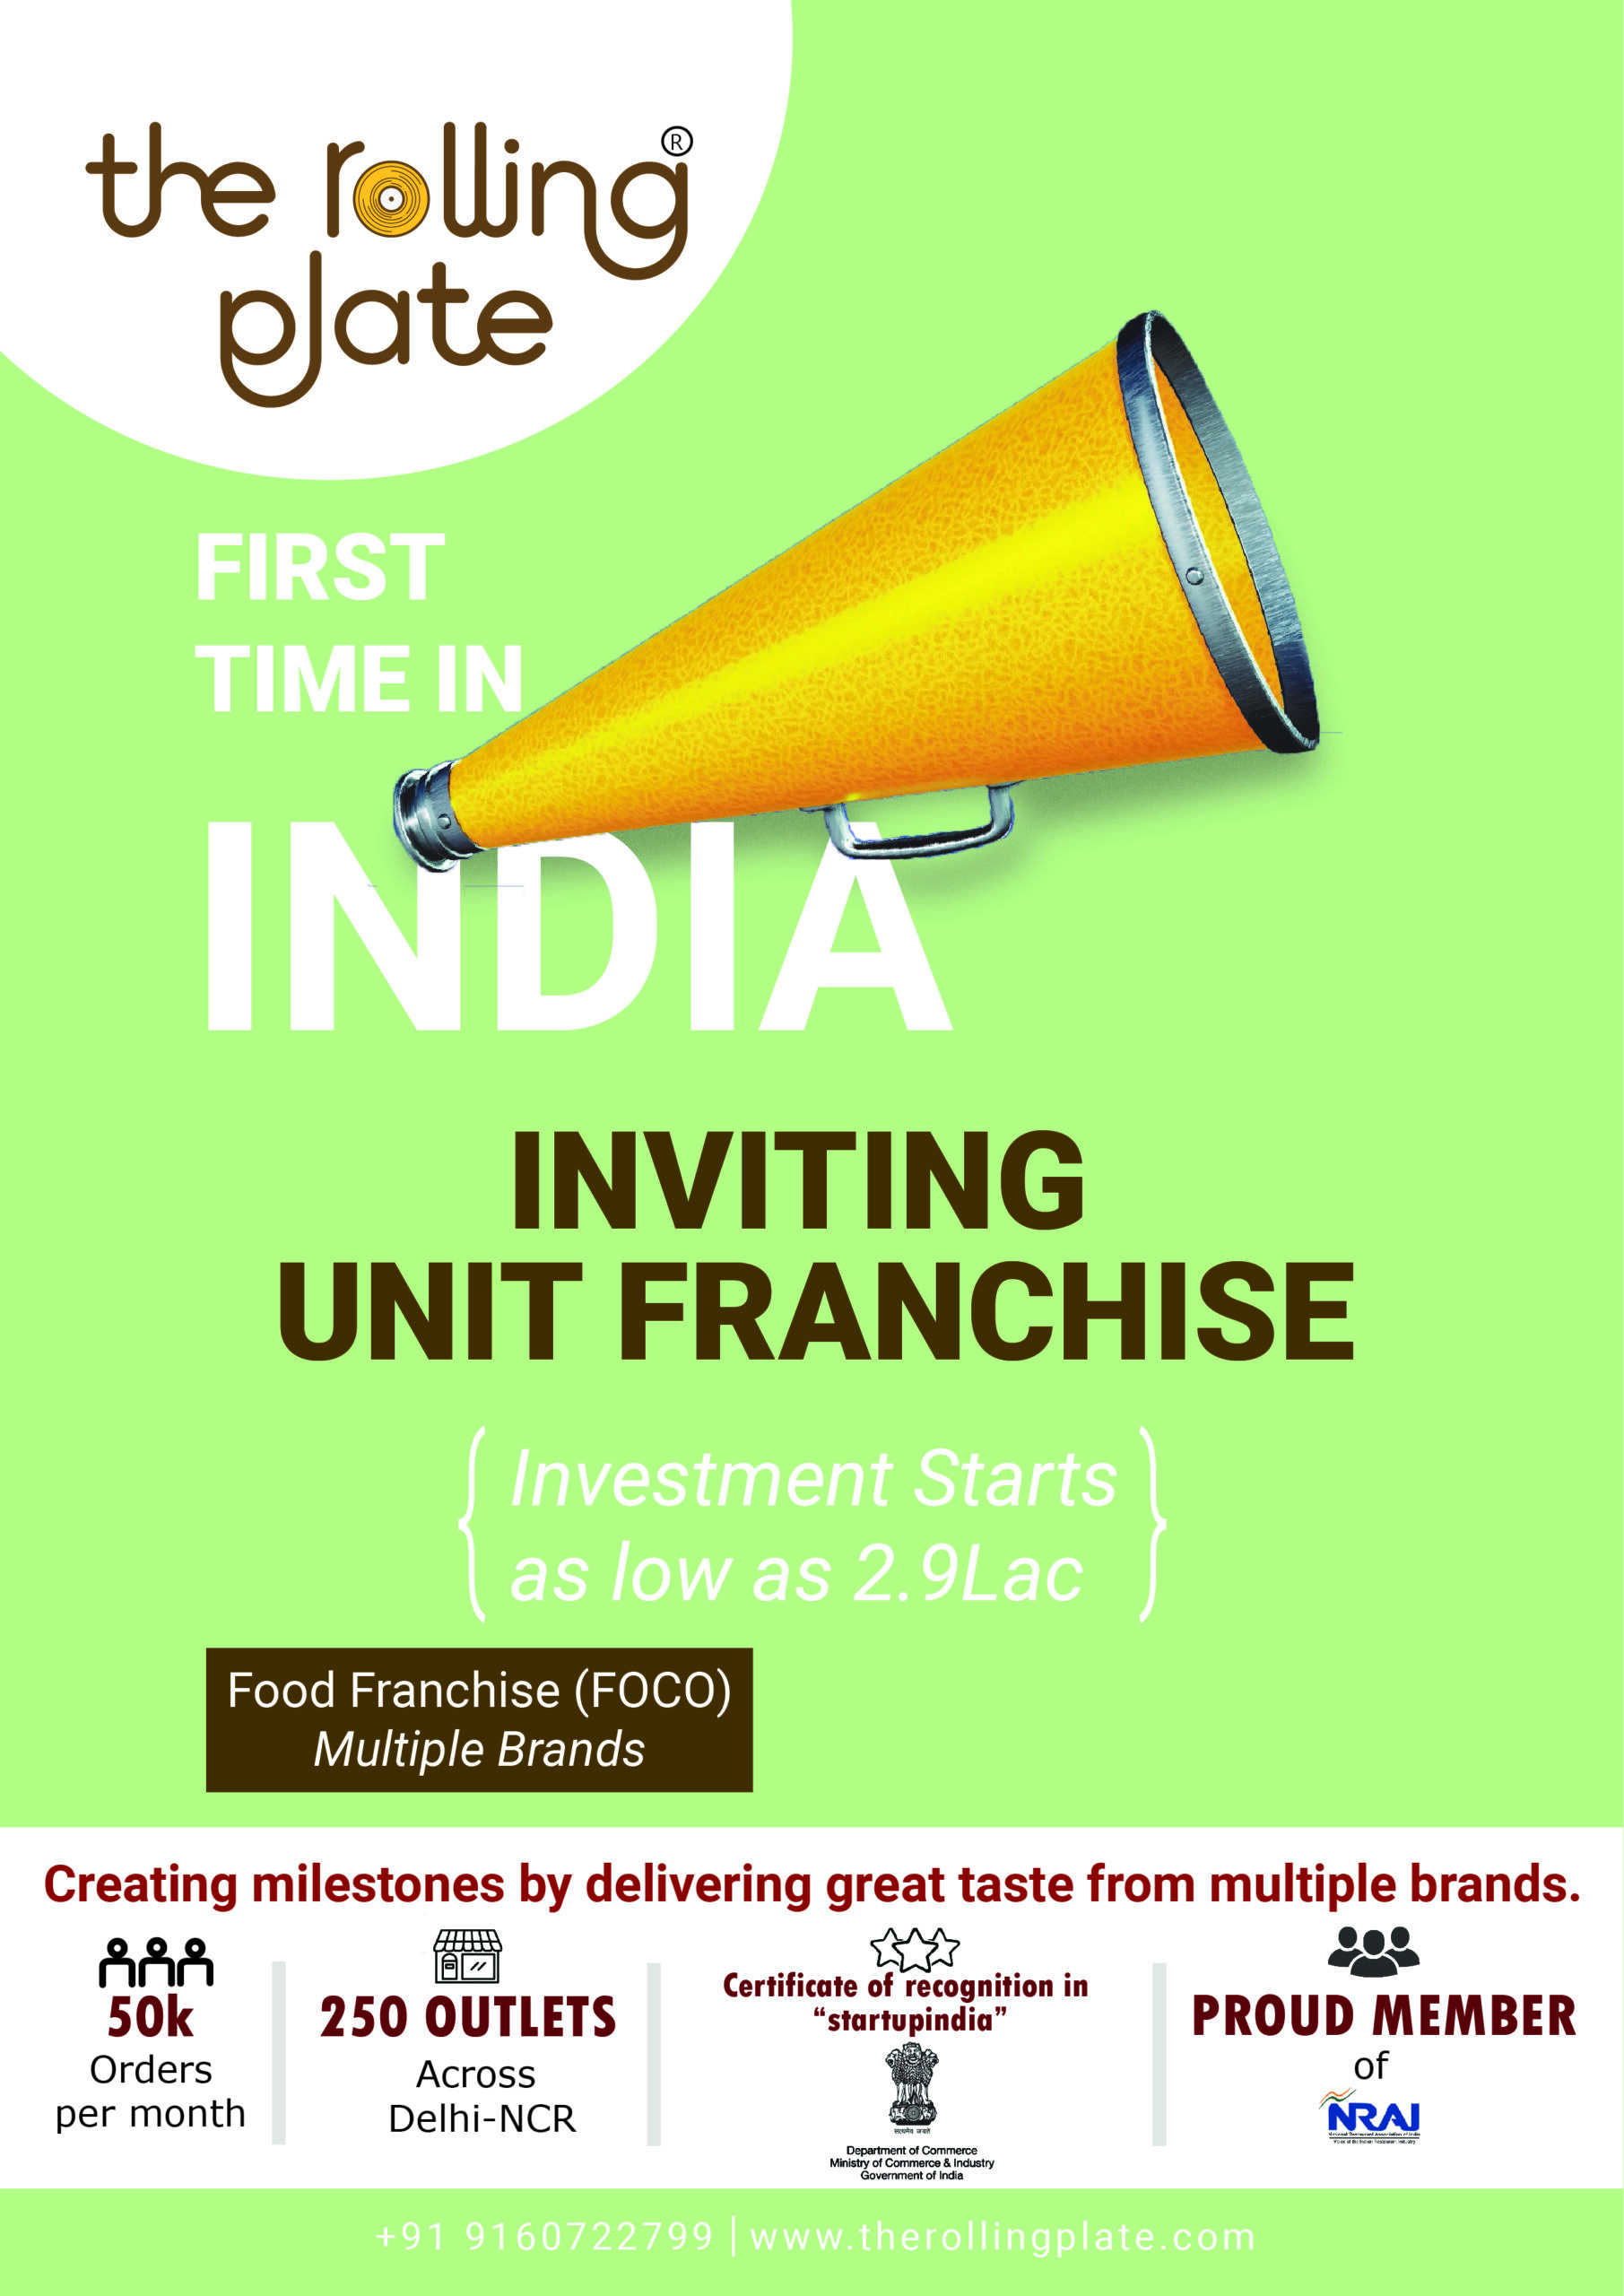 unit franchise for the rolling plate now invited